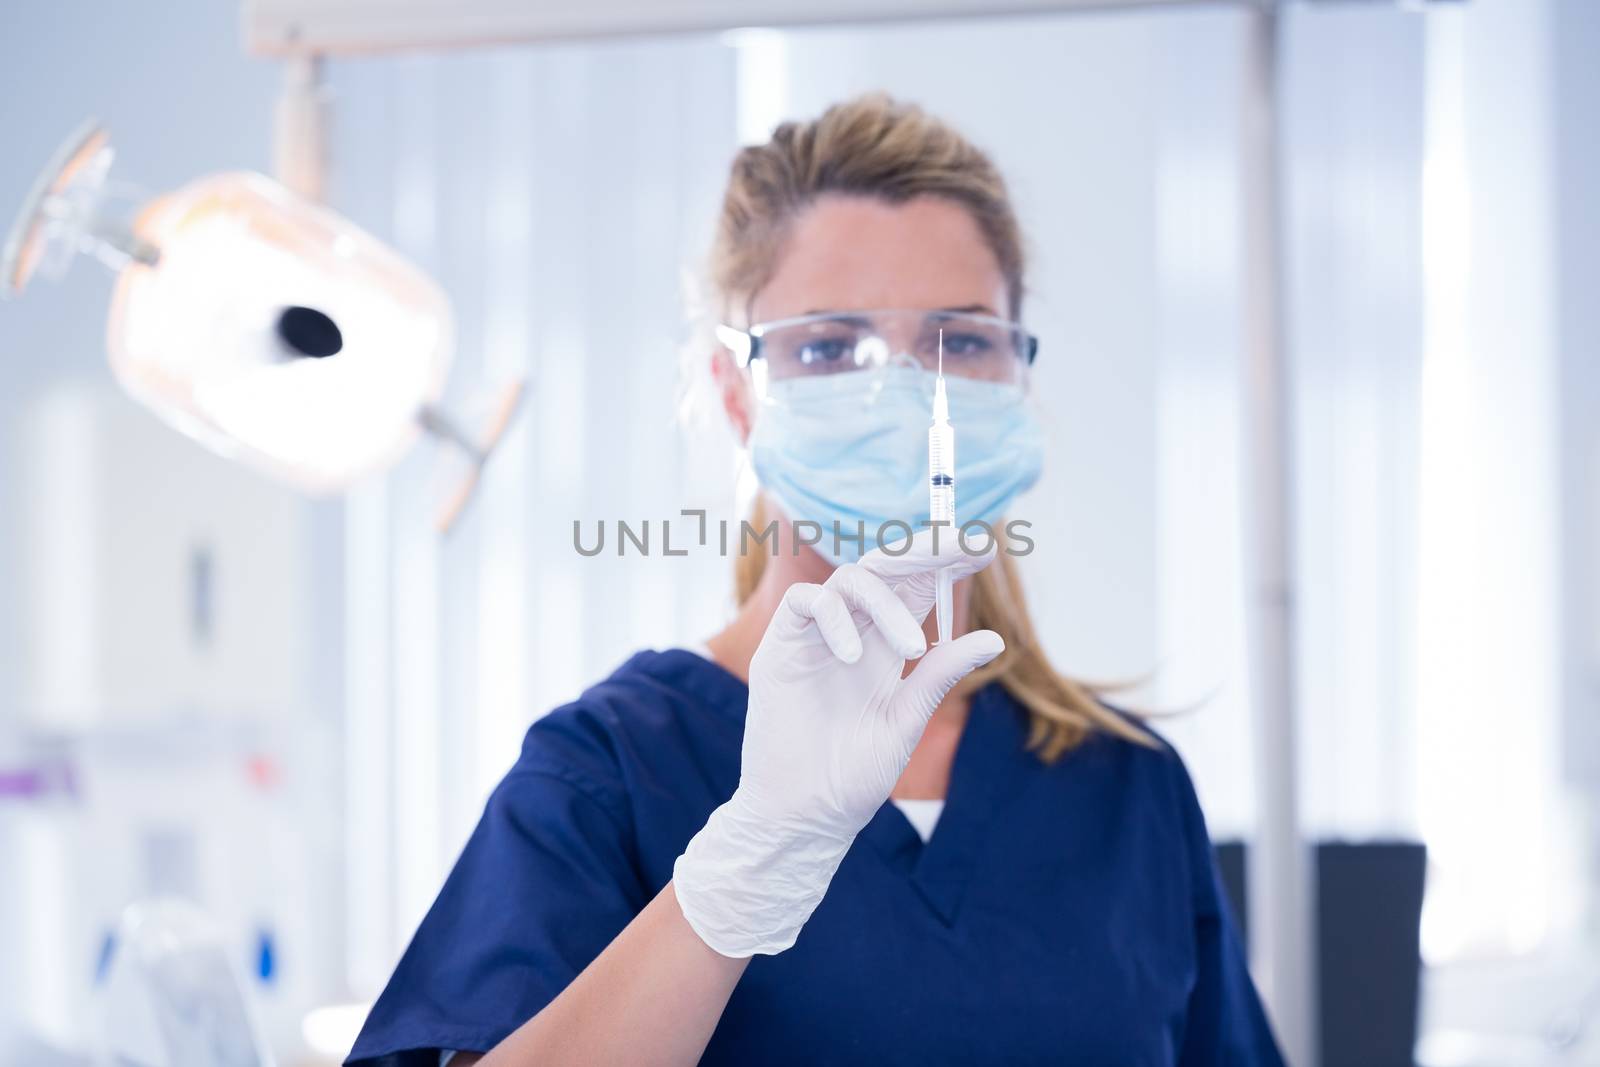 Dentist in mask and glove holding an injection at the dental clinic